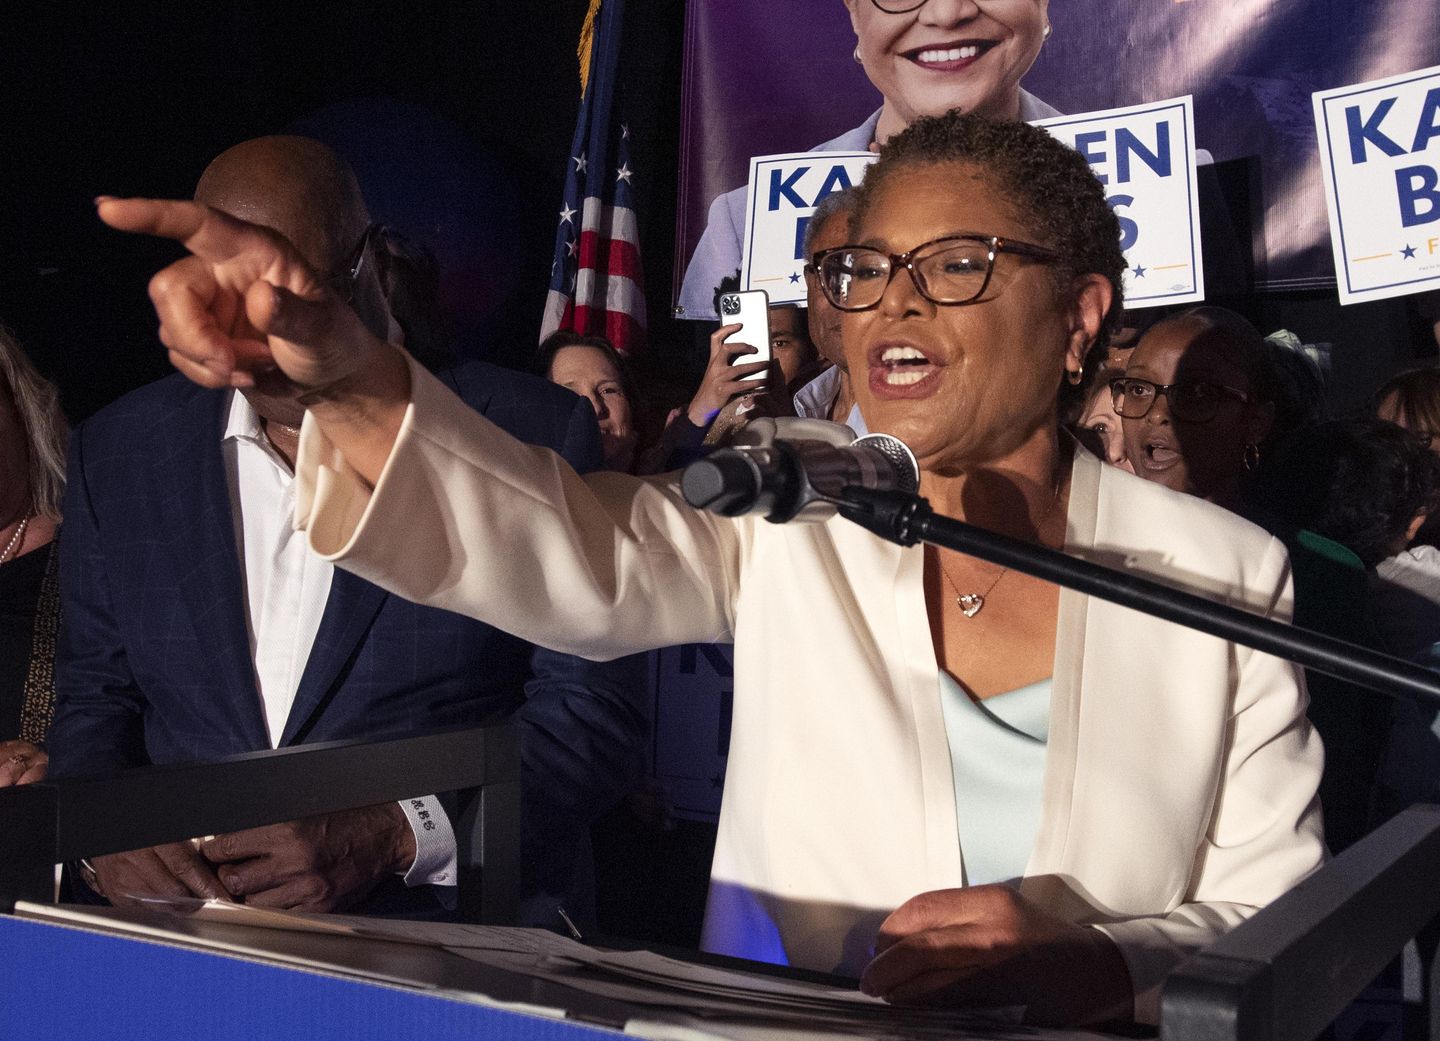 Two men charged for stealing guns from Rep. Karen Bass's Los Angeles home